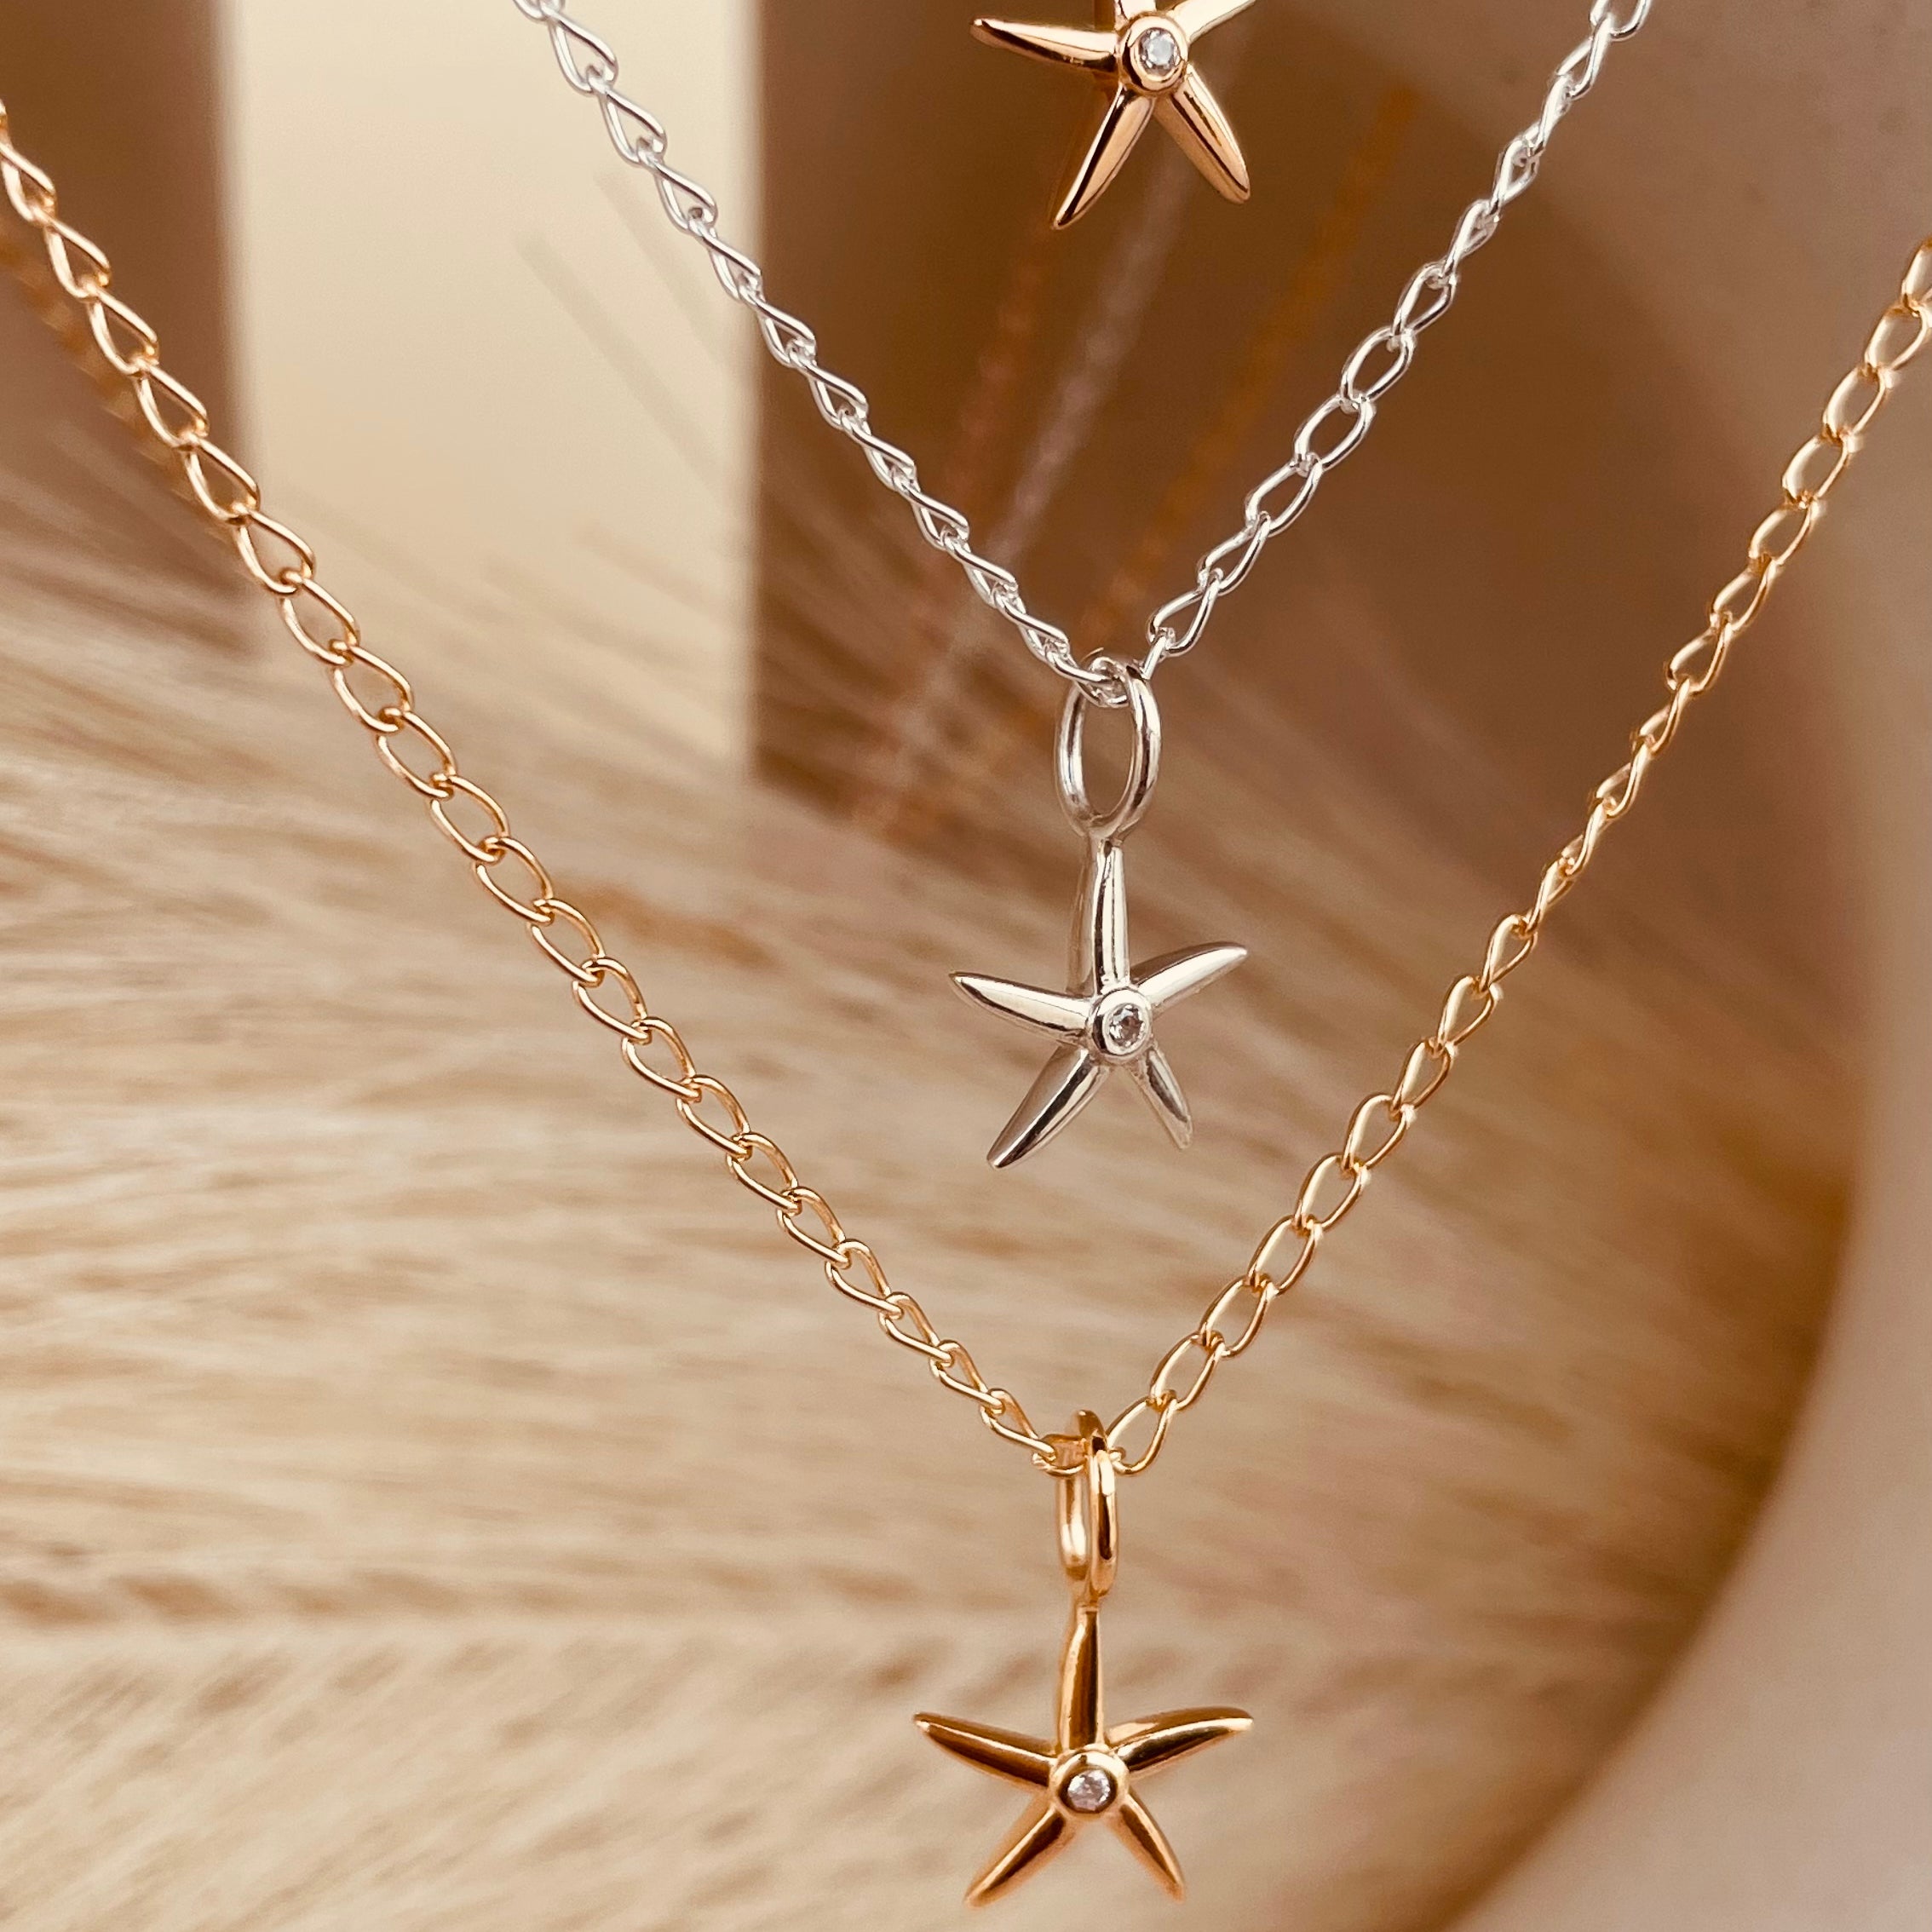 Minimal Starfish Necklace with Cable Chain - Octonov 